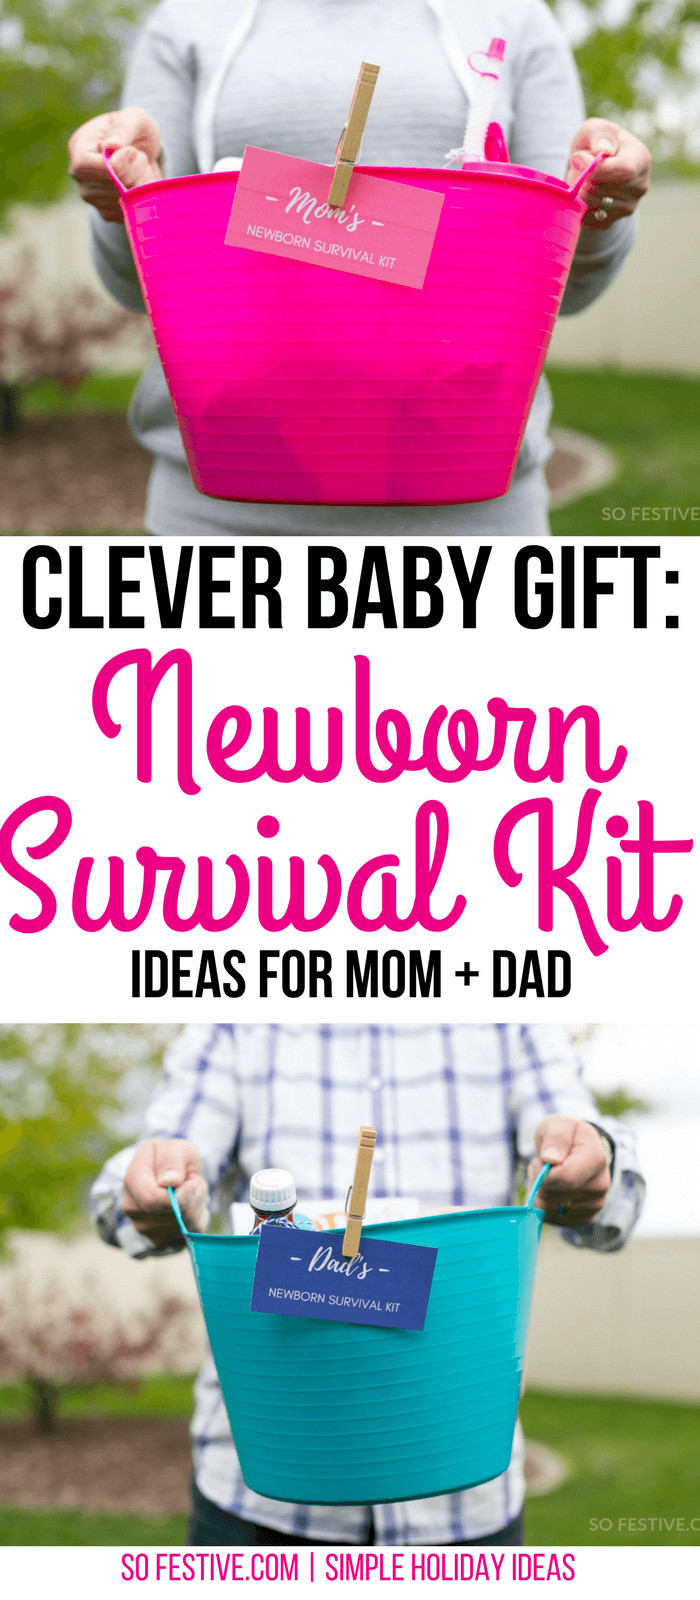 Gift Ideas For Mom To Be At Baby Shower
 Newborn Survival Kit Baby Gift For Parents So Festive